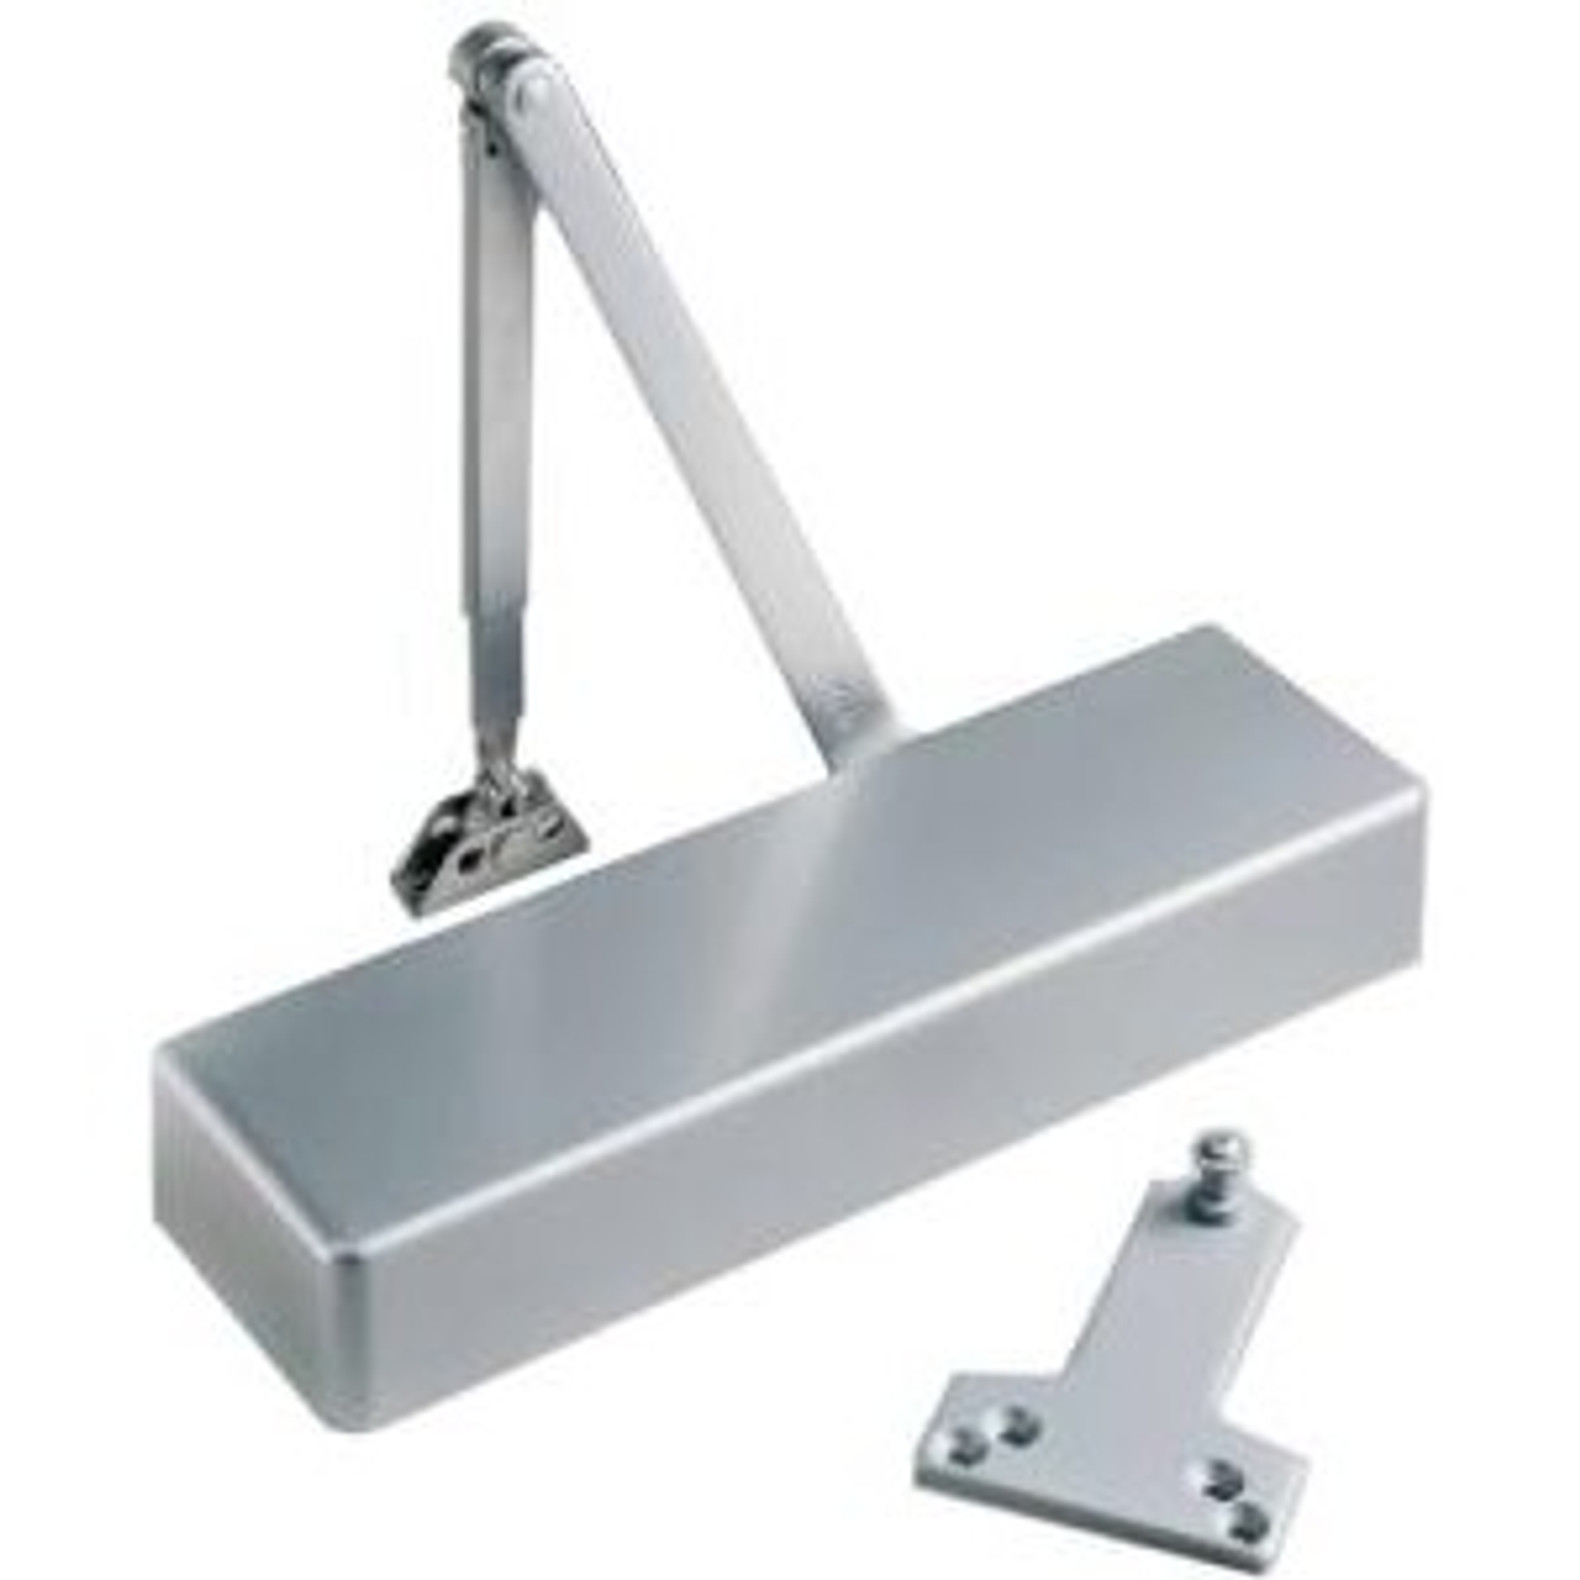 Details about   Norton 7500DAM-689 Delayed Action Institutional Multi-Sized Door Closer w/Cover